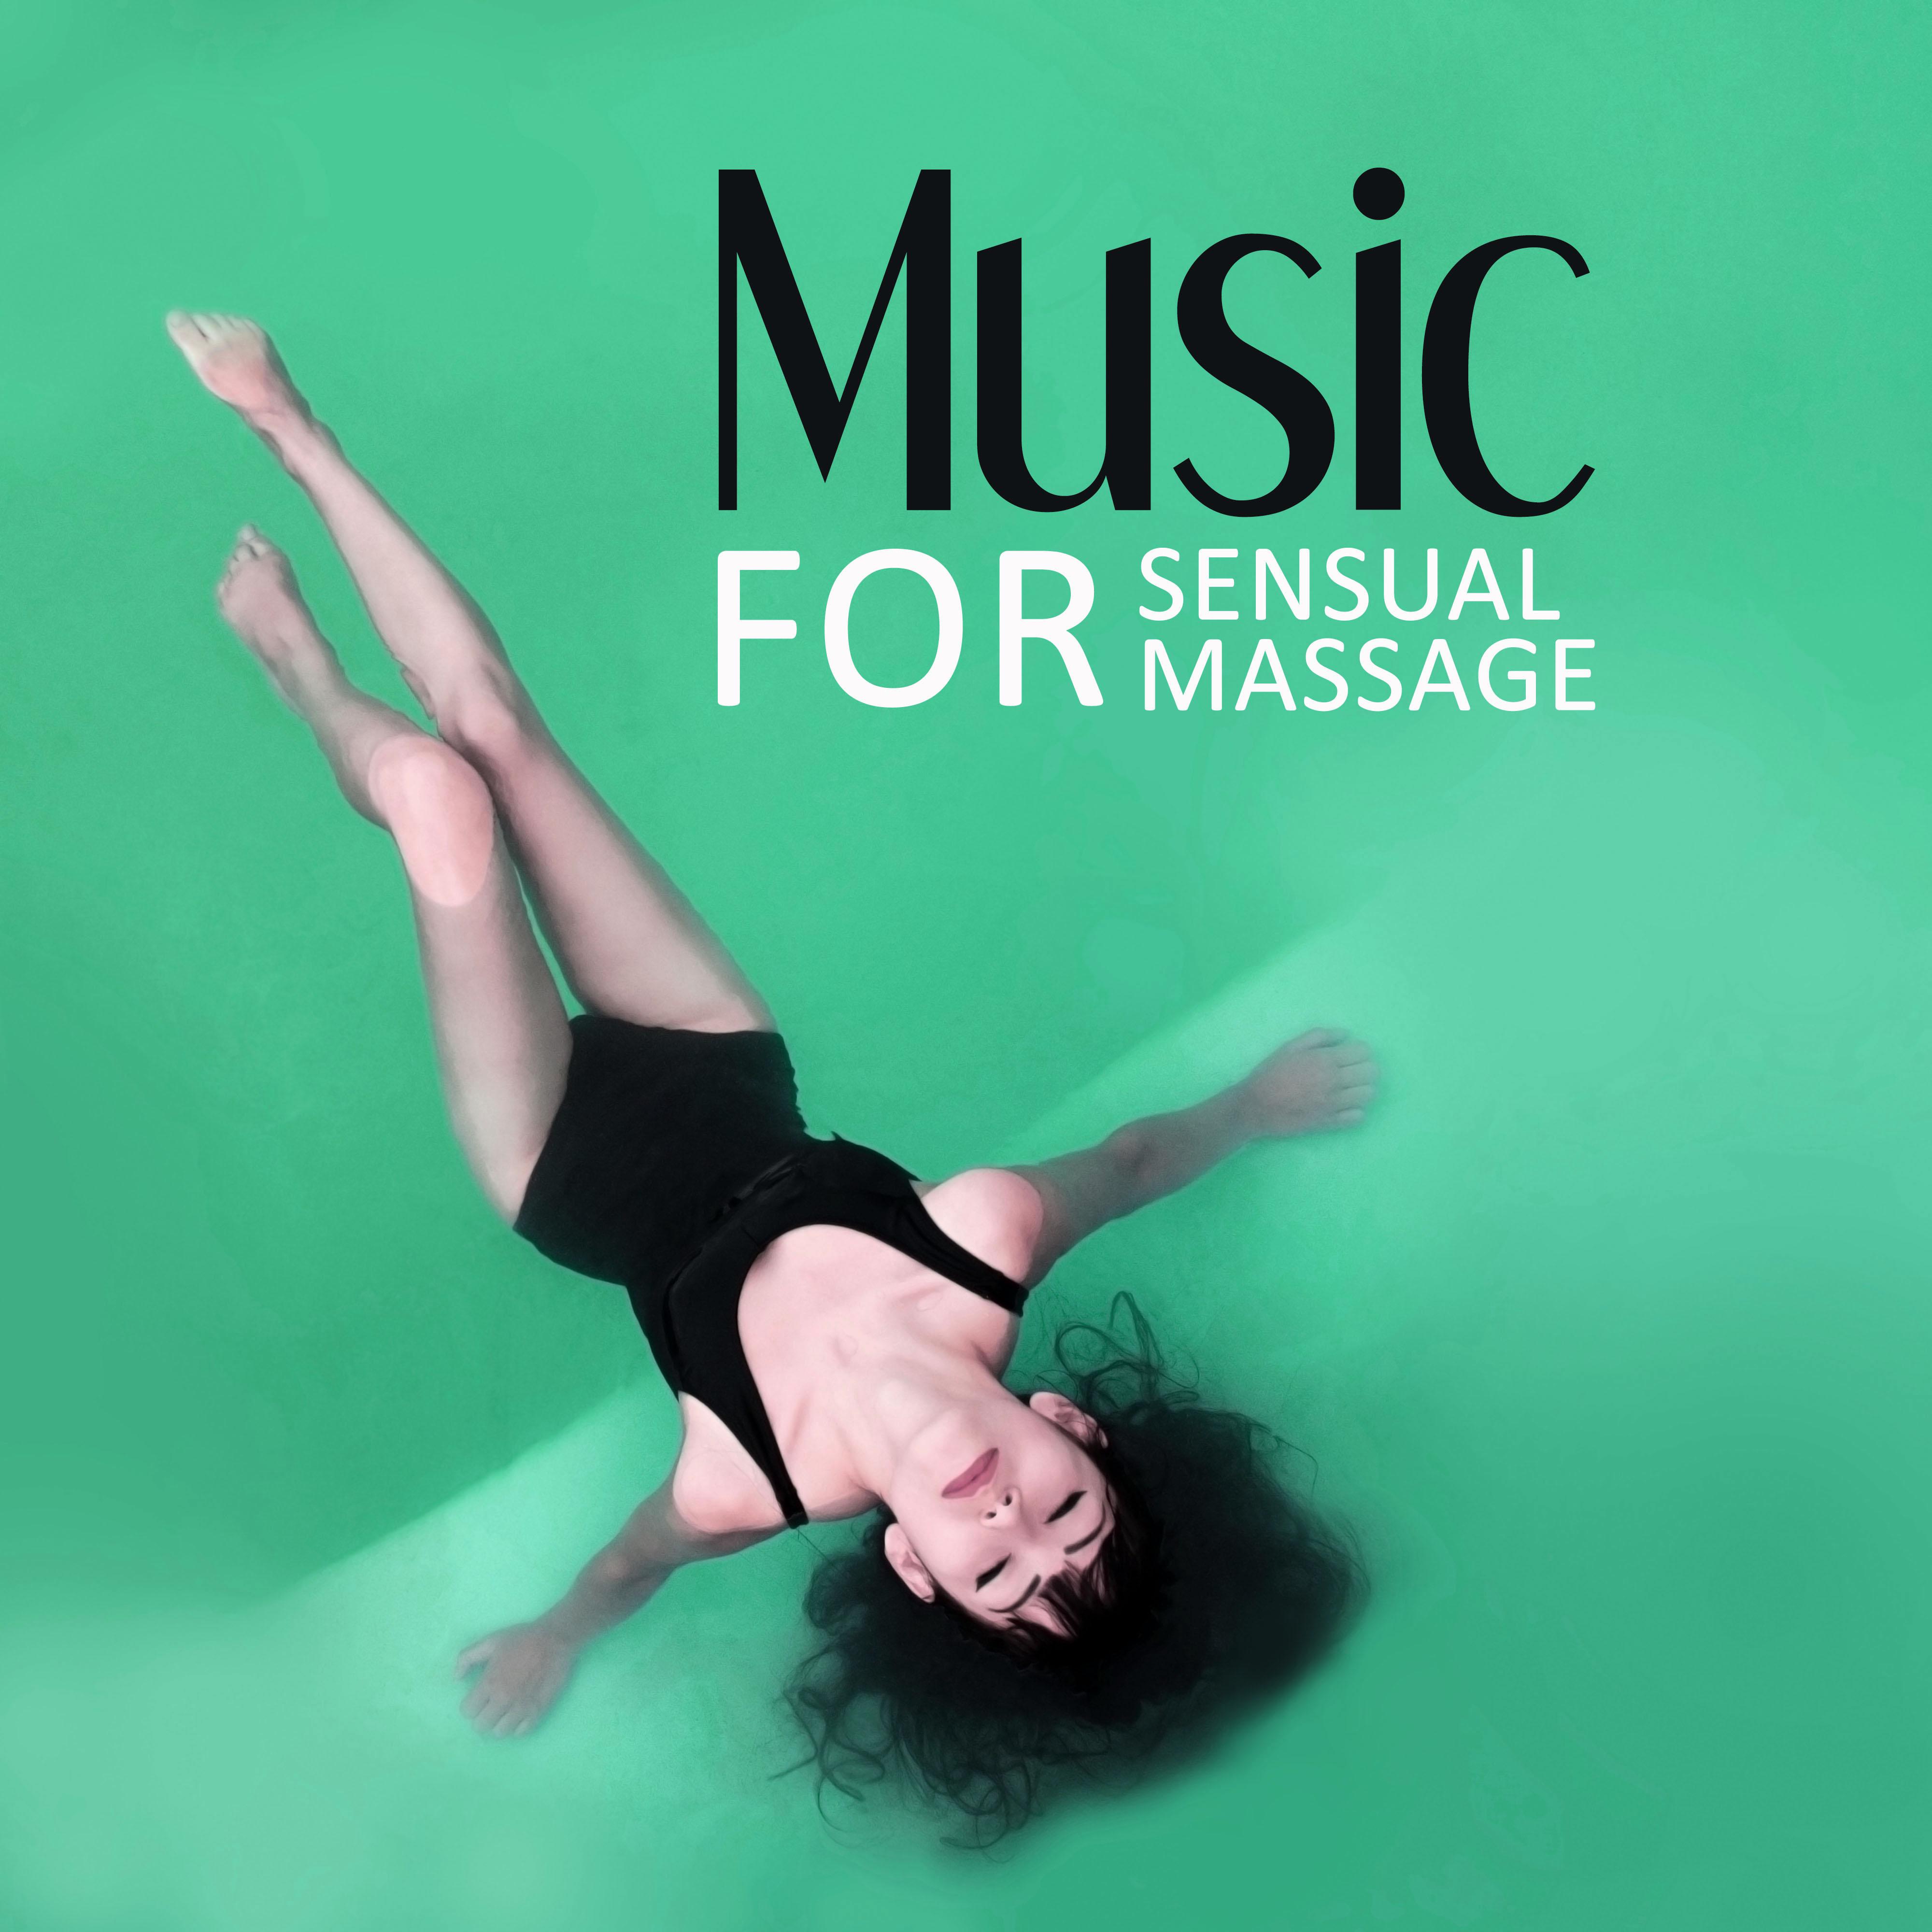 Music for Sensual Massage  Music for Wellness, Serenity Music, Deep Sounds for Relaxation, Pure Nature Sounds for Stress Relief, Music for Aromatherapy, Lounge Music, Pure Spa